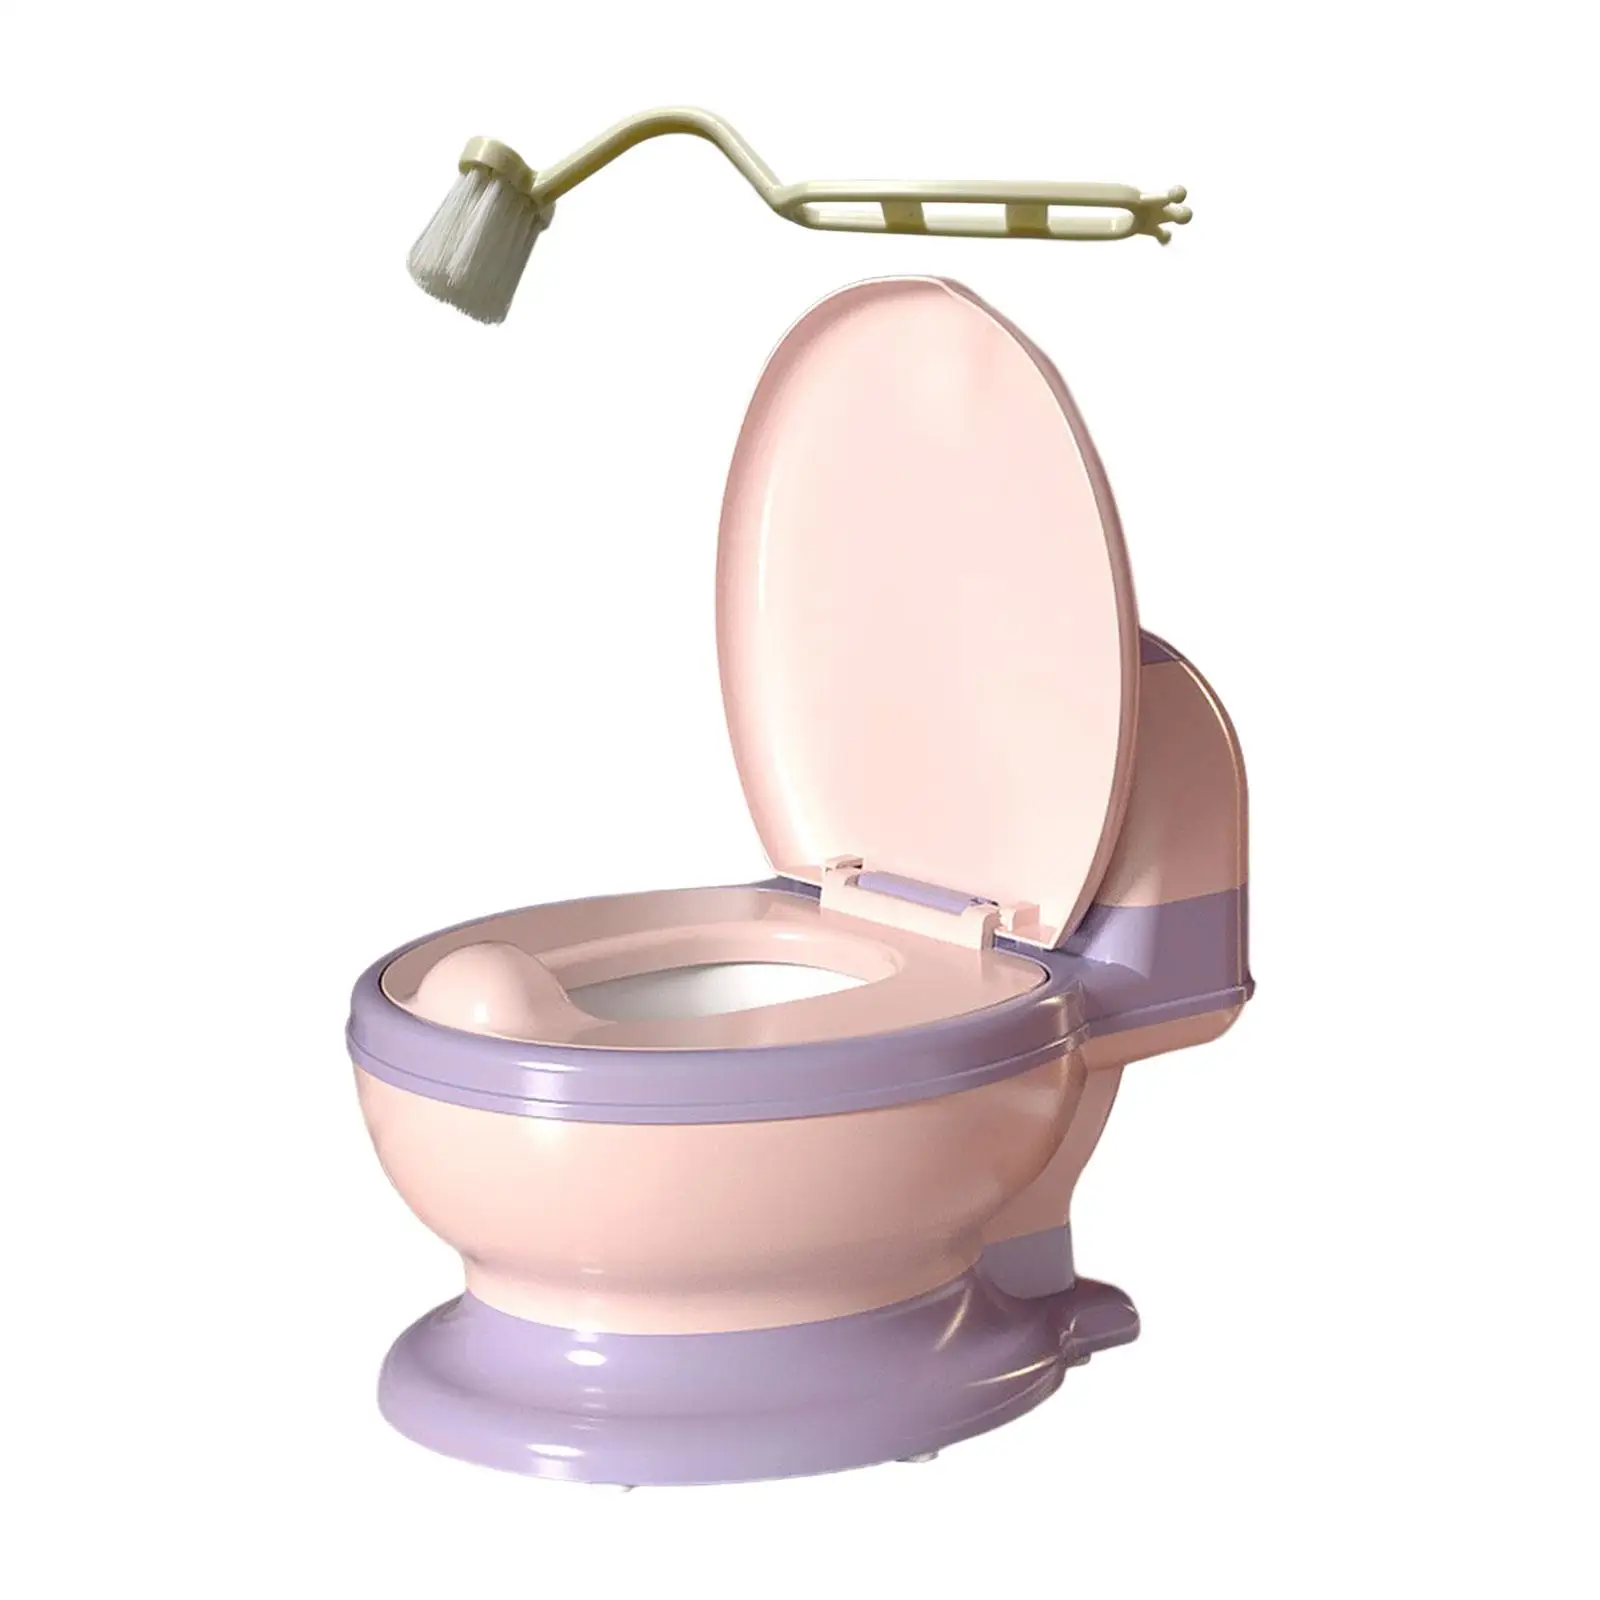 Toilet Training Potty Easy to Clean Compact Size Real Feel Potty Realistic Toilet Infants Toilet Seat Babies Girls Boys Ages 0-7